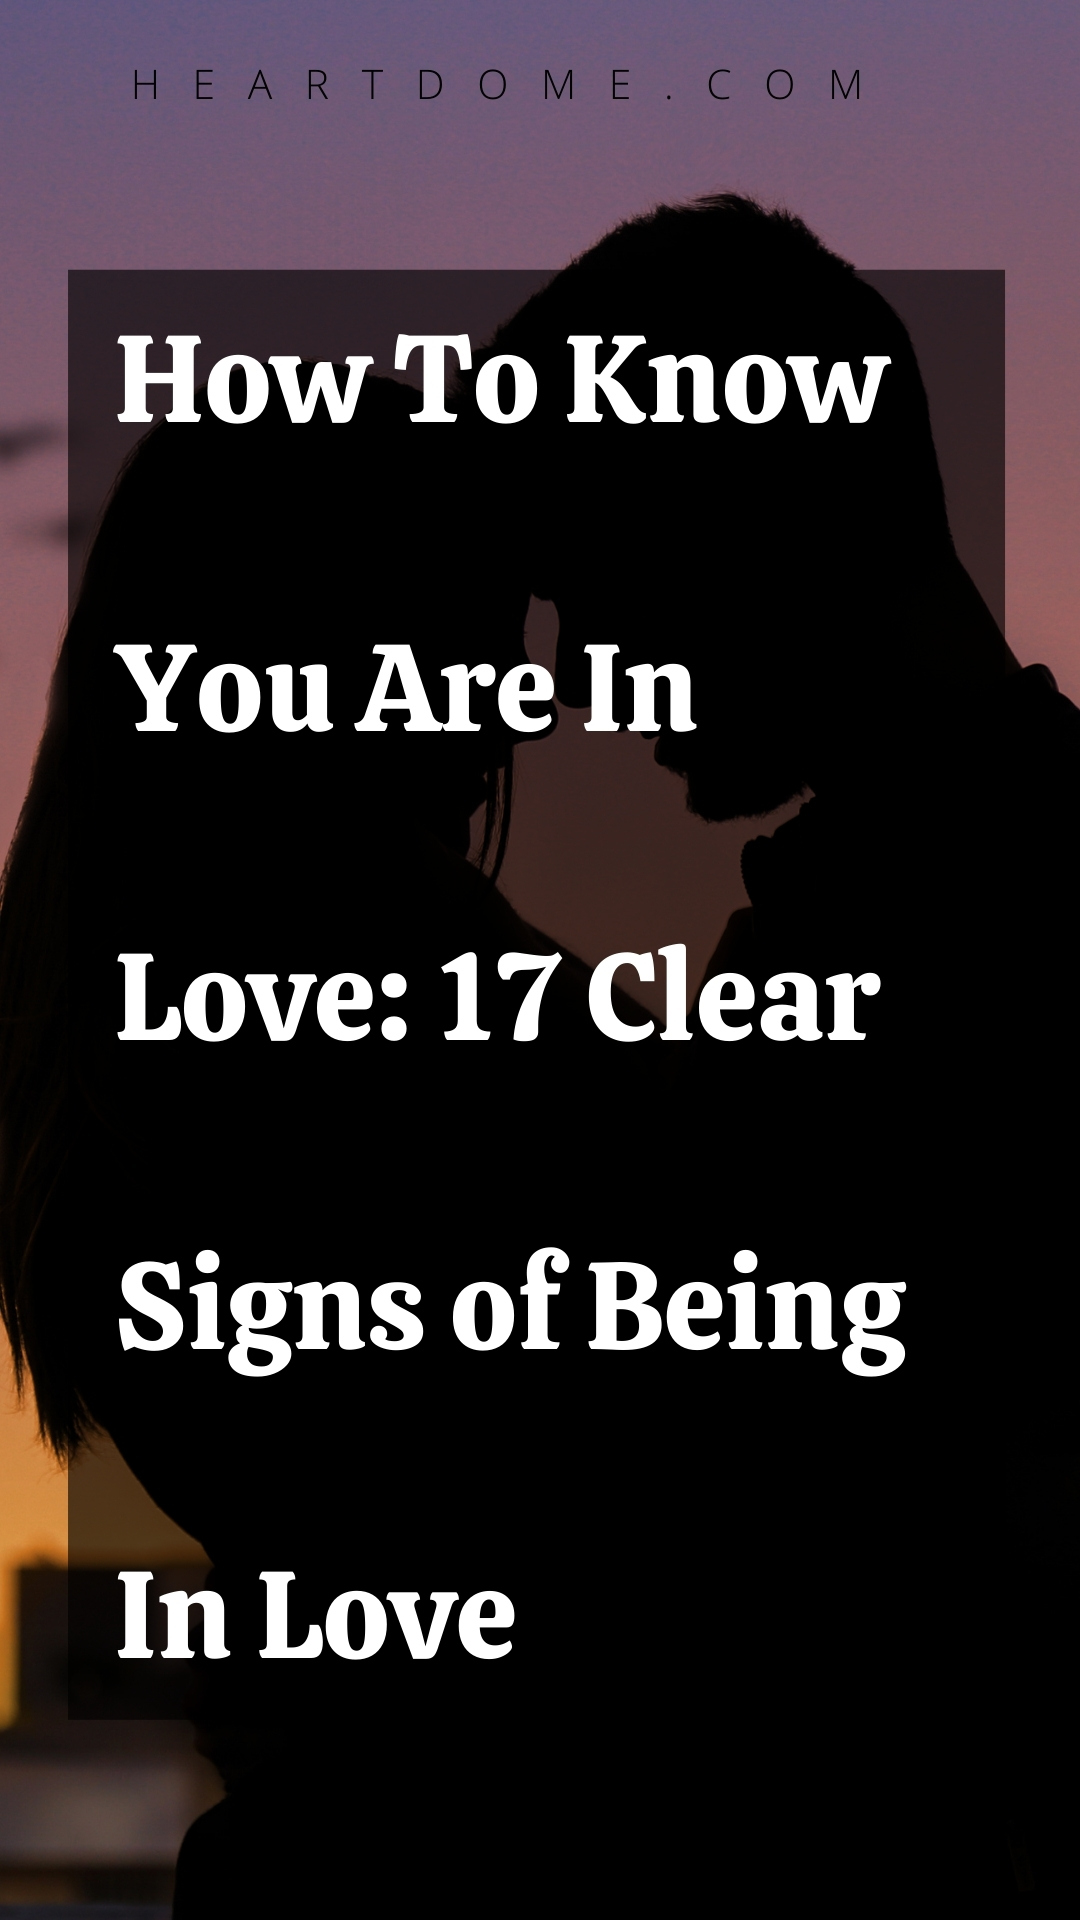 How To Know You Are In Love: 17 Clear Signs of Being In Love - Heart Dome